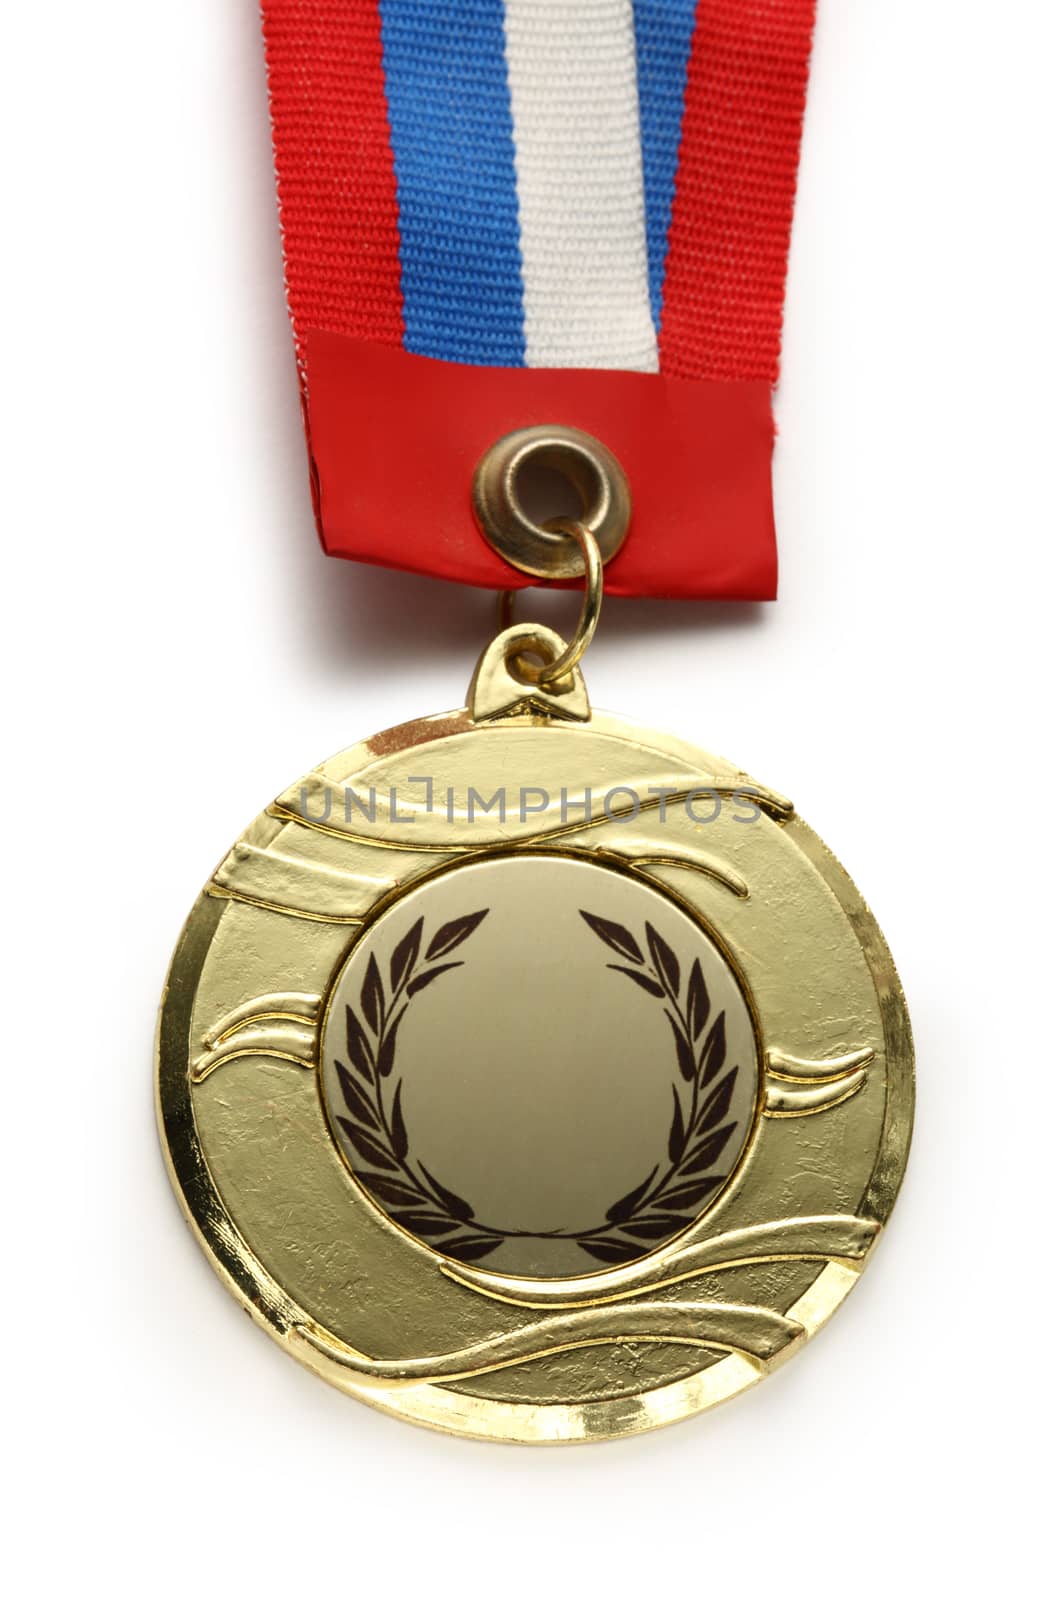 Metal medal with tricolor ribbon